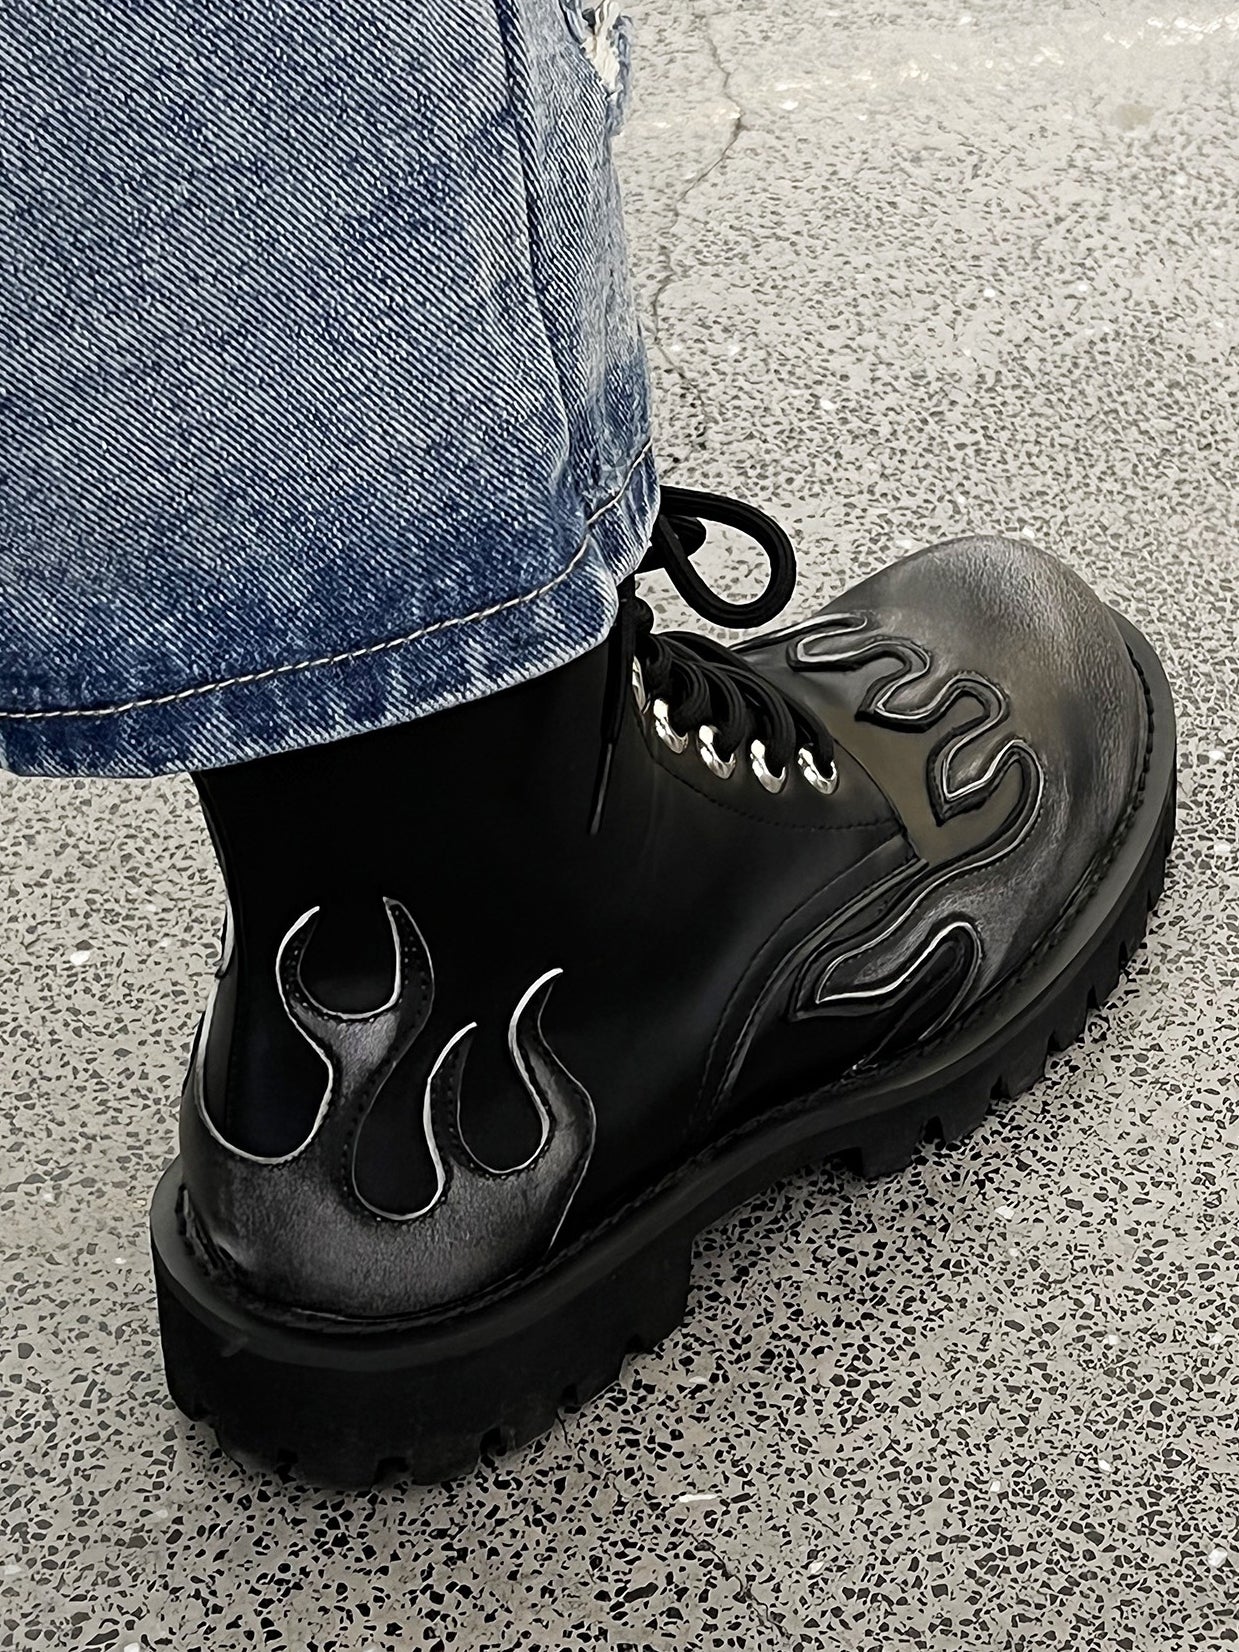 【HOT!】Cool Shoes with Flame Pattern